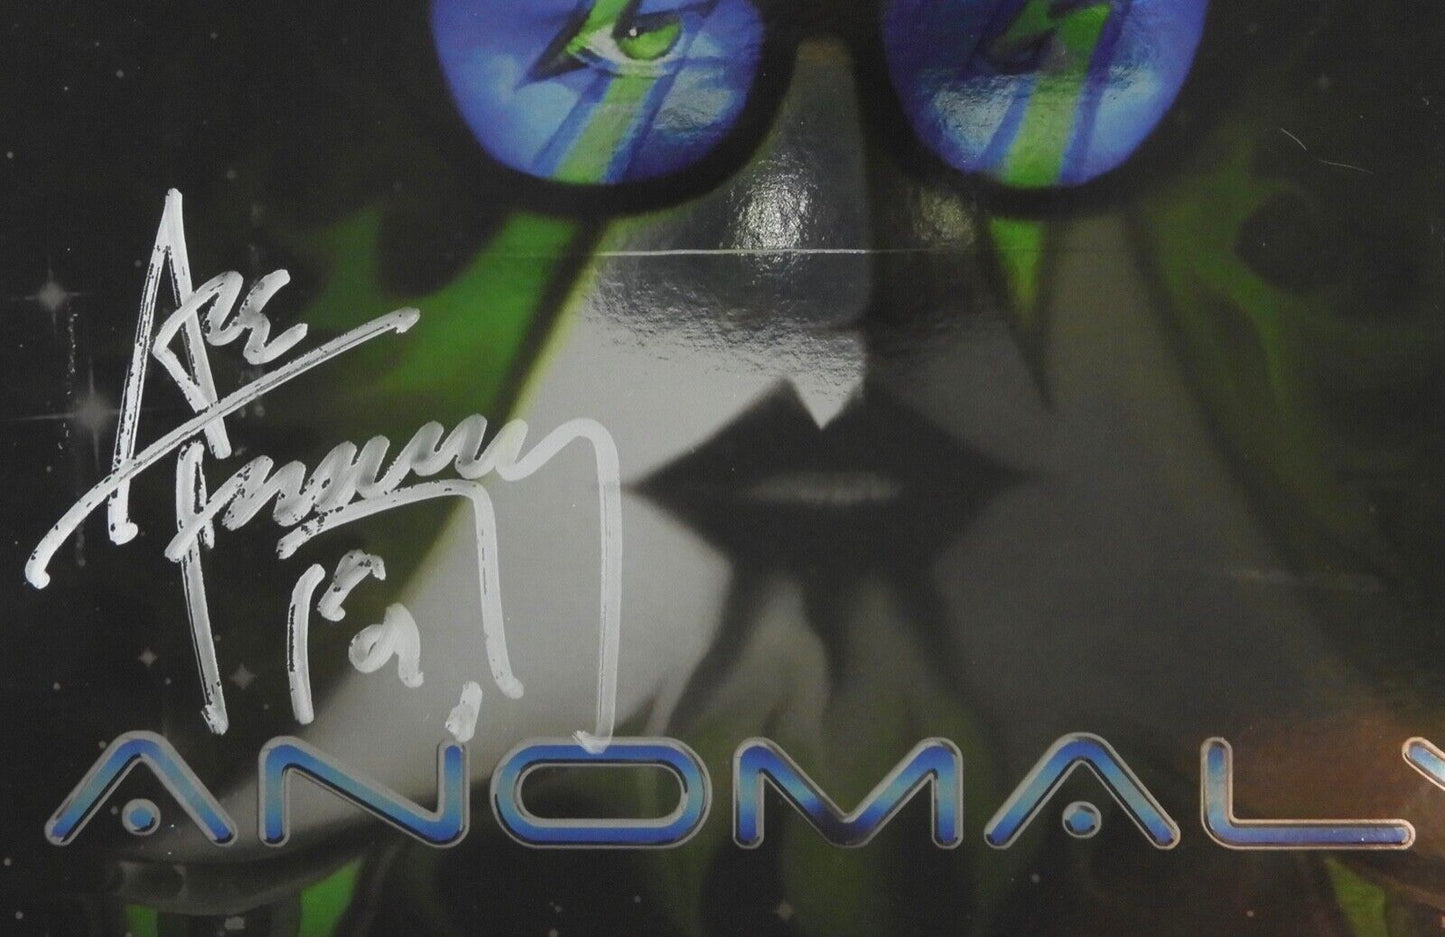 KISS Ace Frehley JSA Autograph Signed Record Album Anomaly 2009 Foil Cover